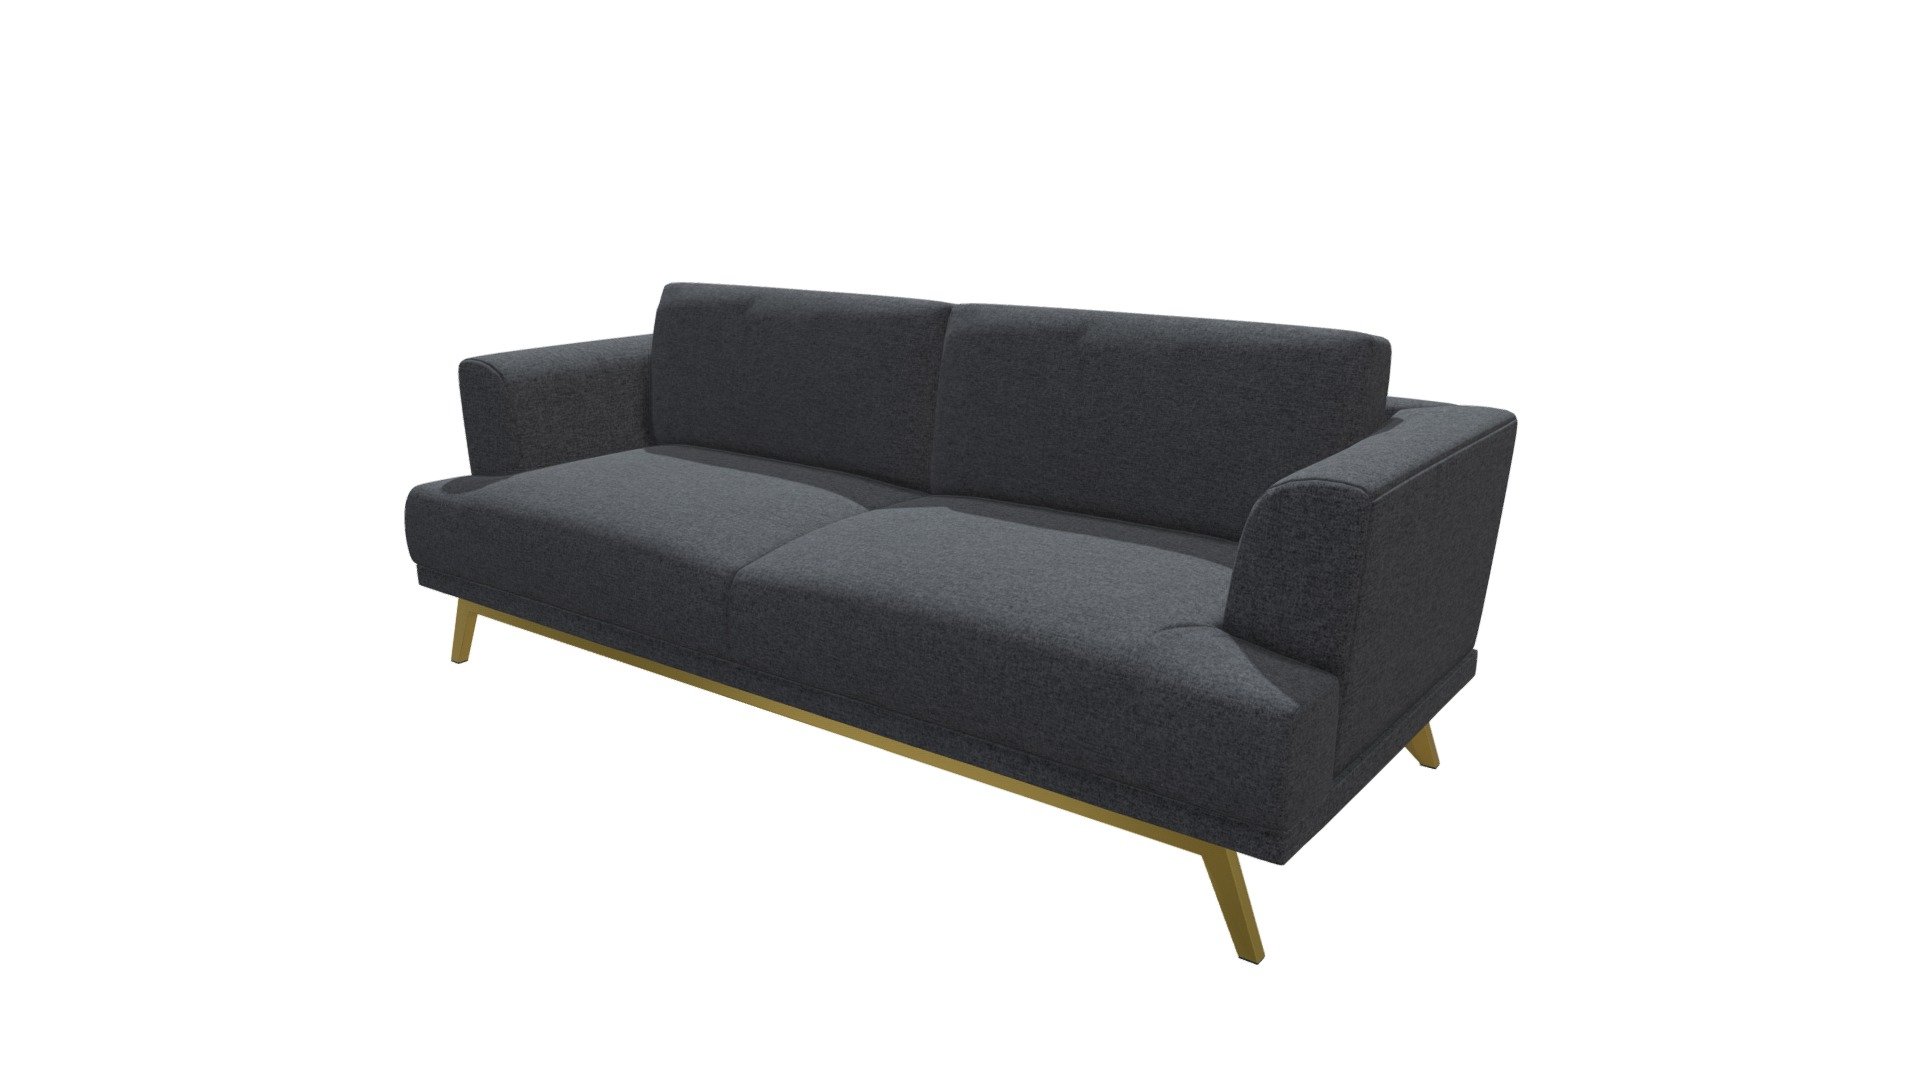 Crisp clean lines on the Surreptitious Sofa create a slim profile featuring a soft rounded arm, plush box style seat /back cushions for all day comfort. Upholstered in Grey felt style poly-linen fabric and accented by a brilliant Gold finished stainless steel base.   www.zuomod.com - Surreptitious Sofa Gray - 100698 - Buy Royalty Free 3D model by Zuo Modern (@zuo) 3d model